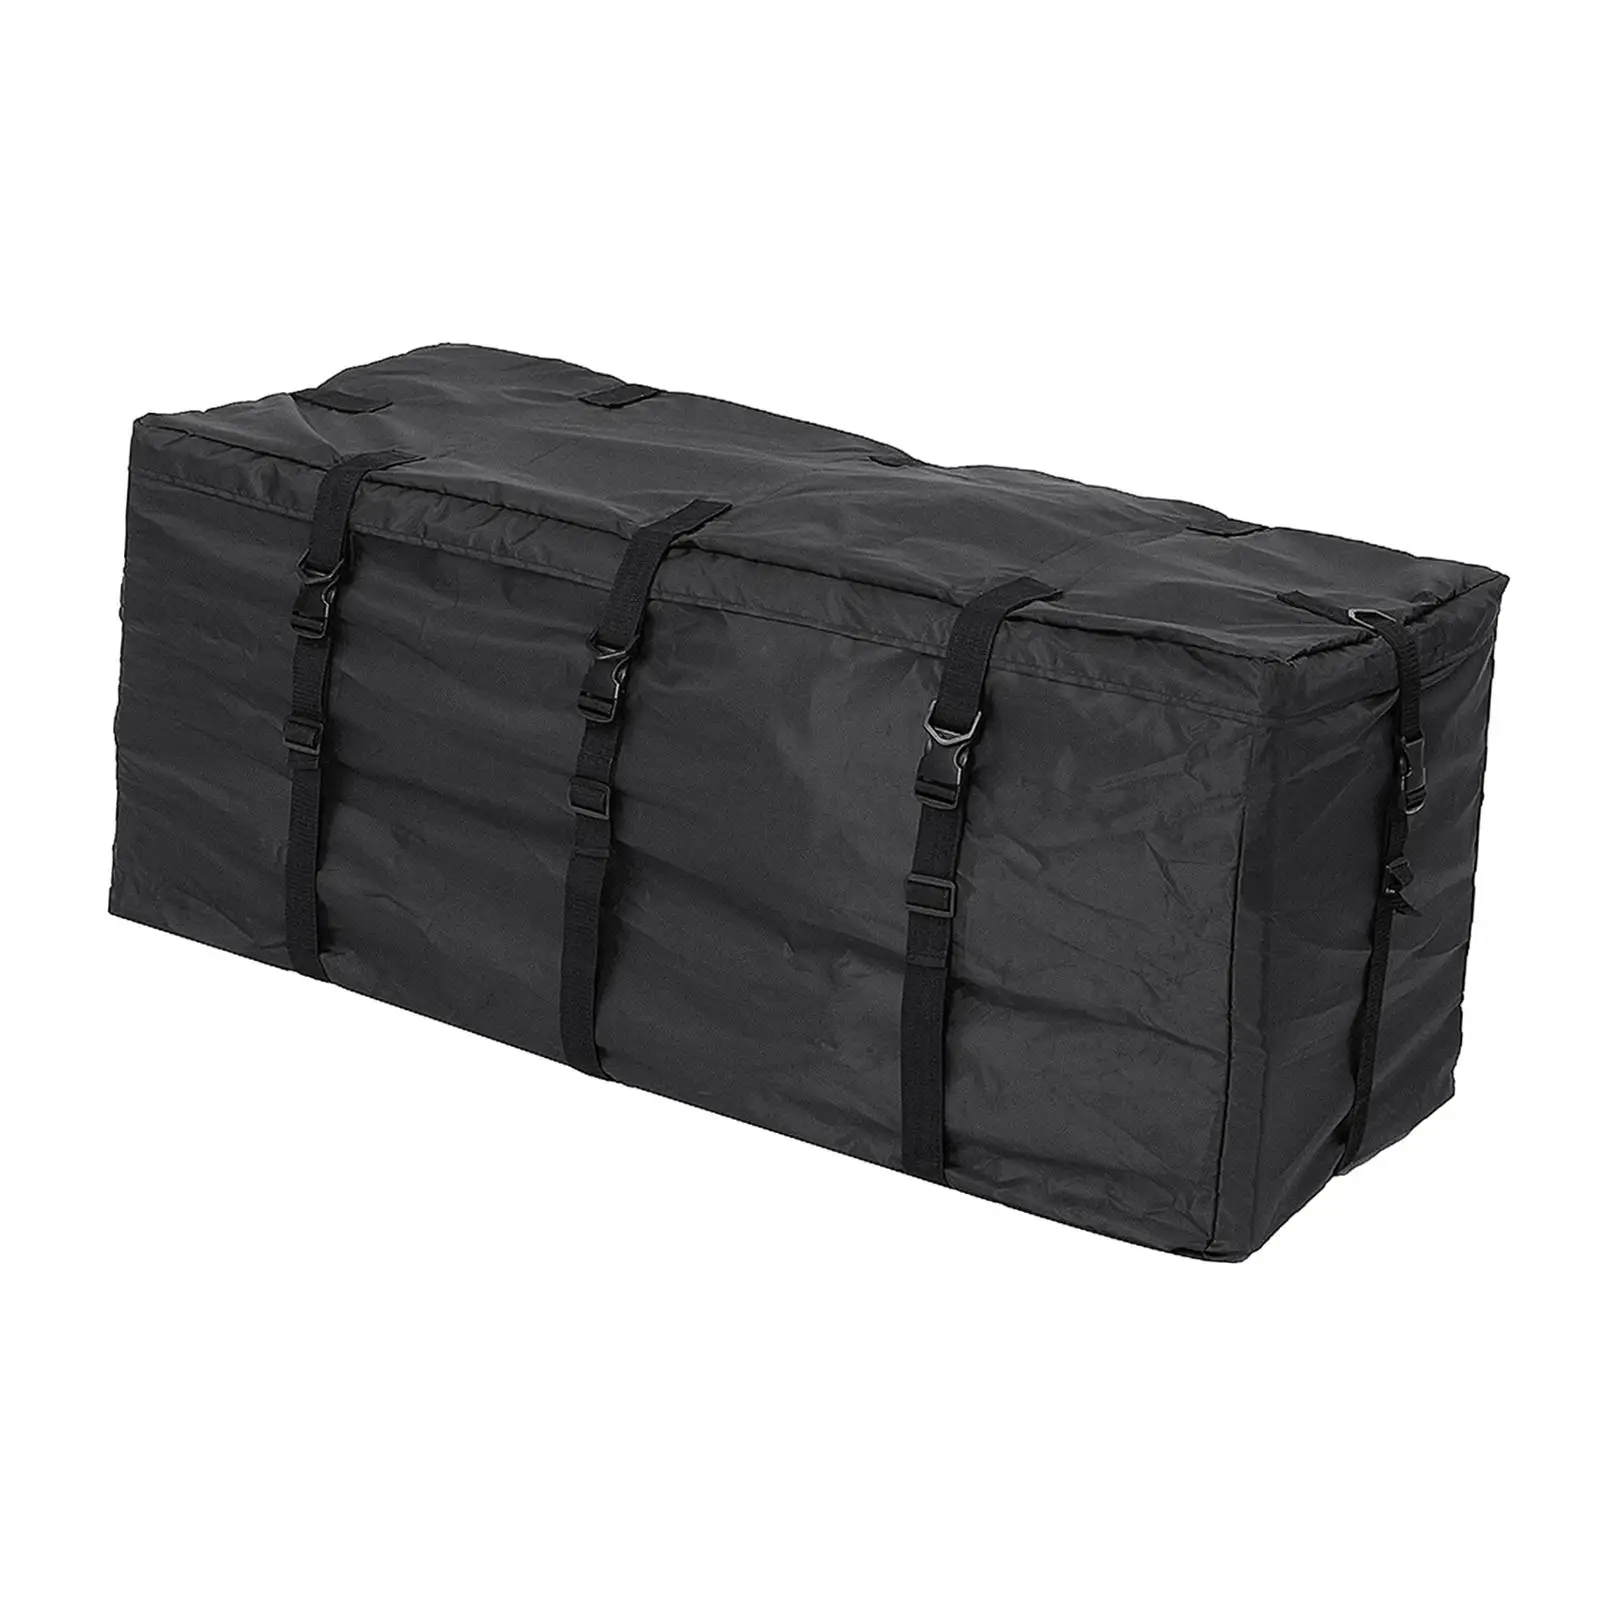 Rooftop Cargo Carrier Bag Luggage Storage Waterproof Carrier Bag Waterproof Roof Luggage Cargo Carrier Bag for Vehicles SUV